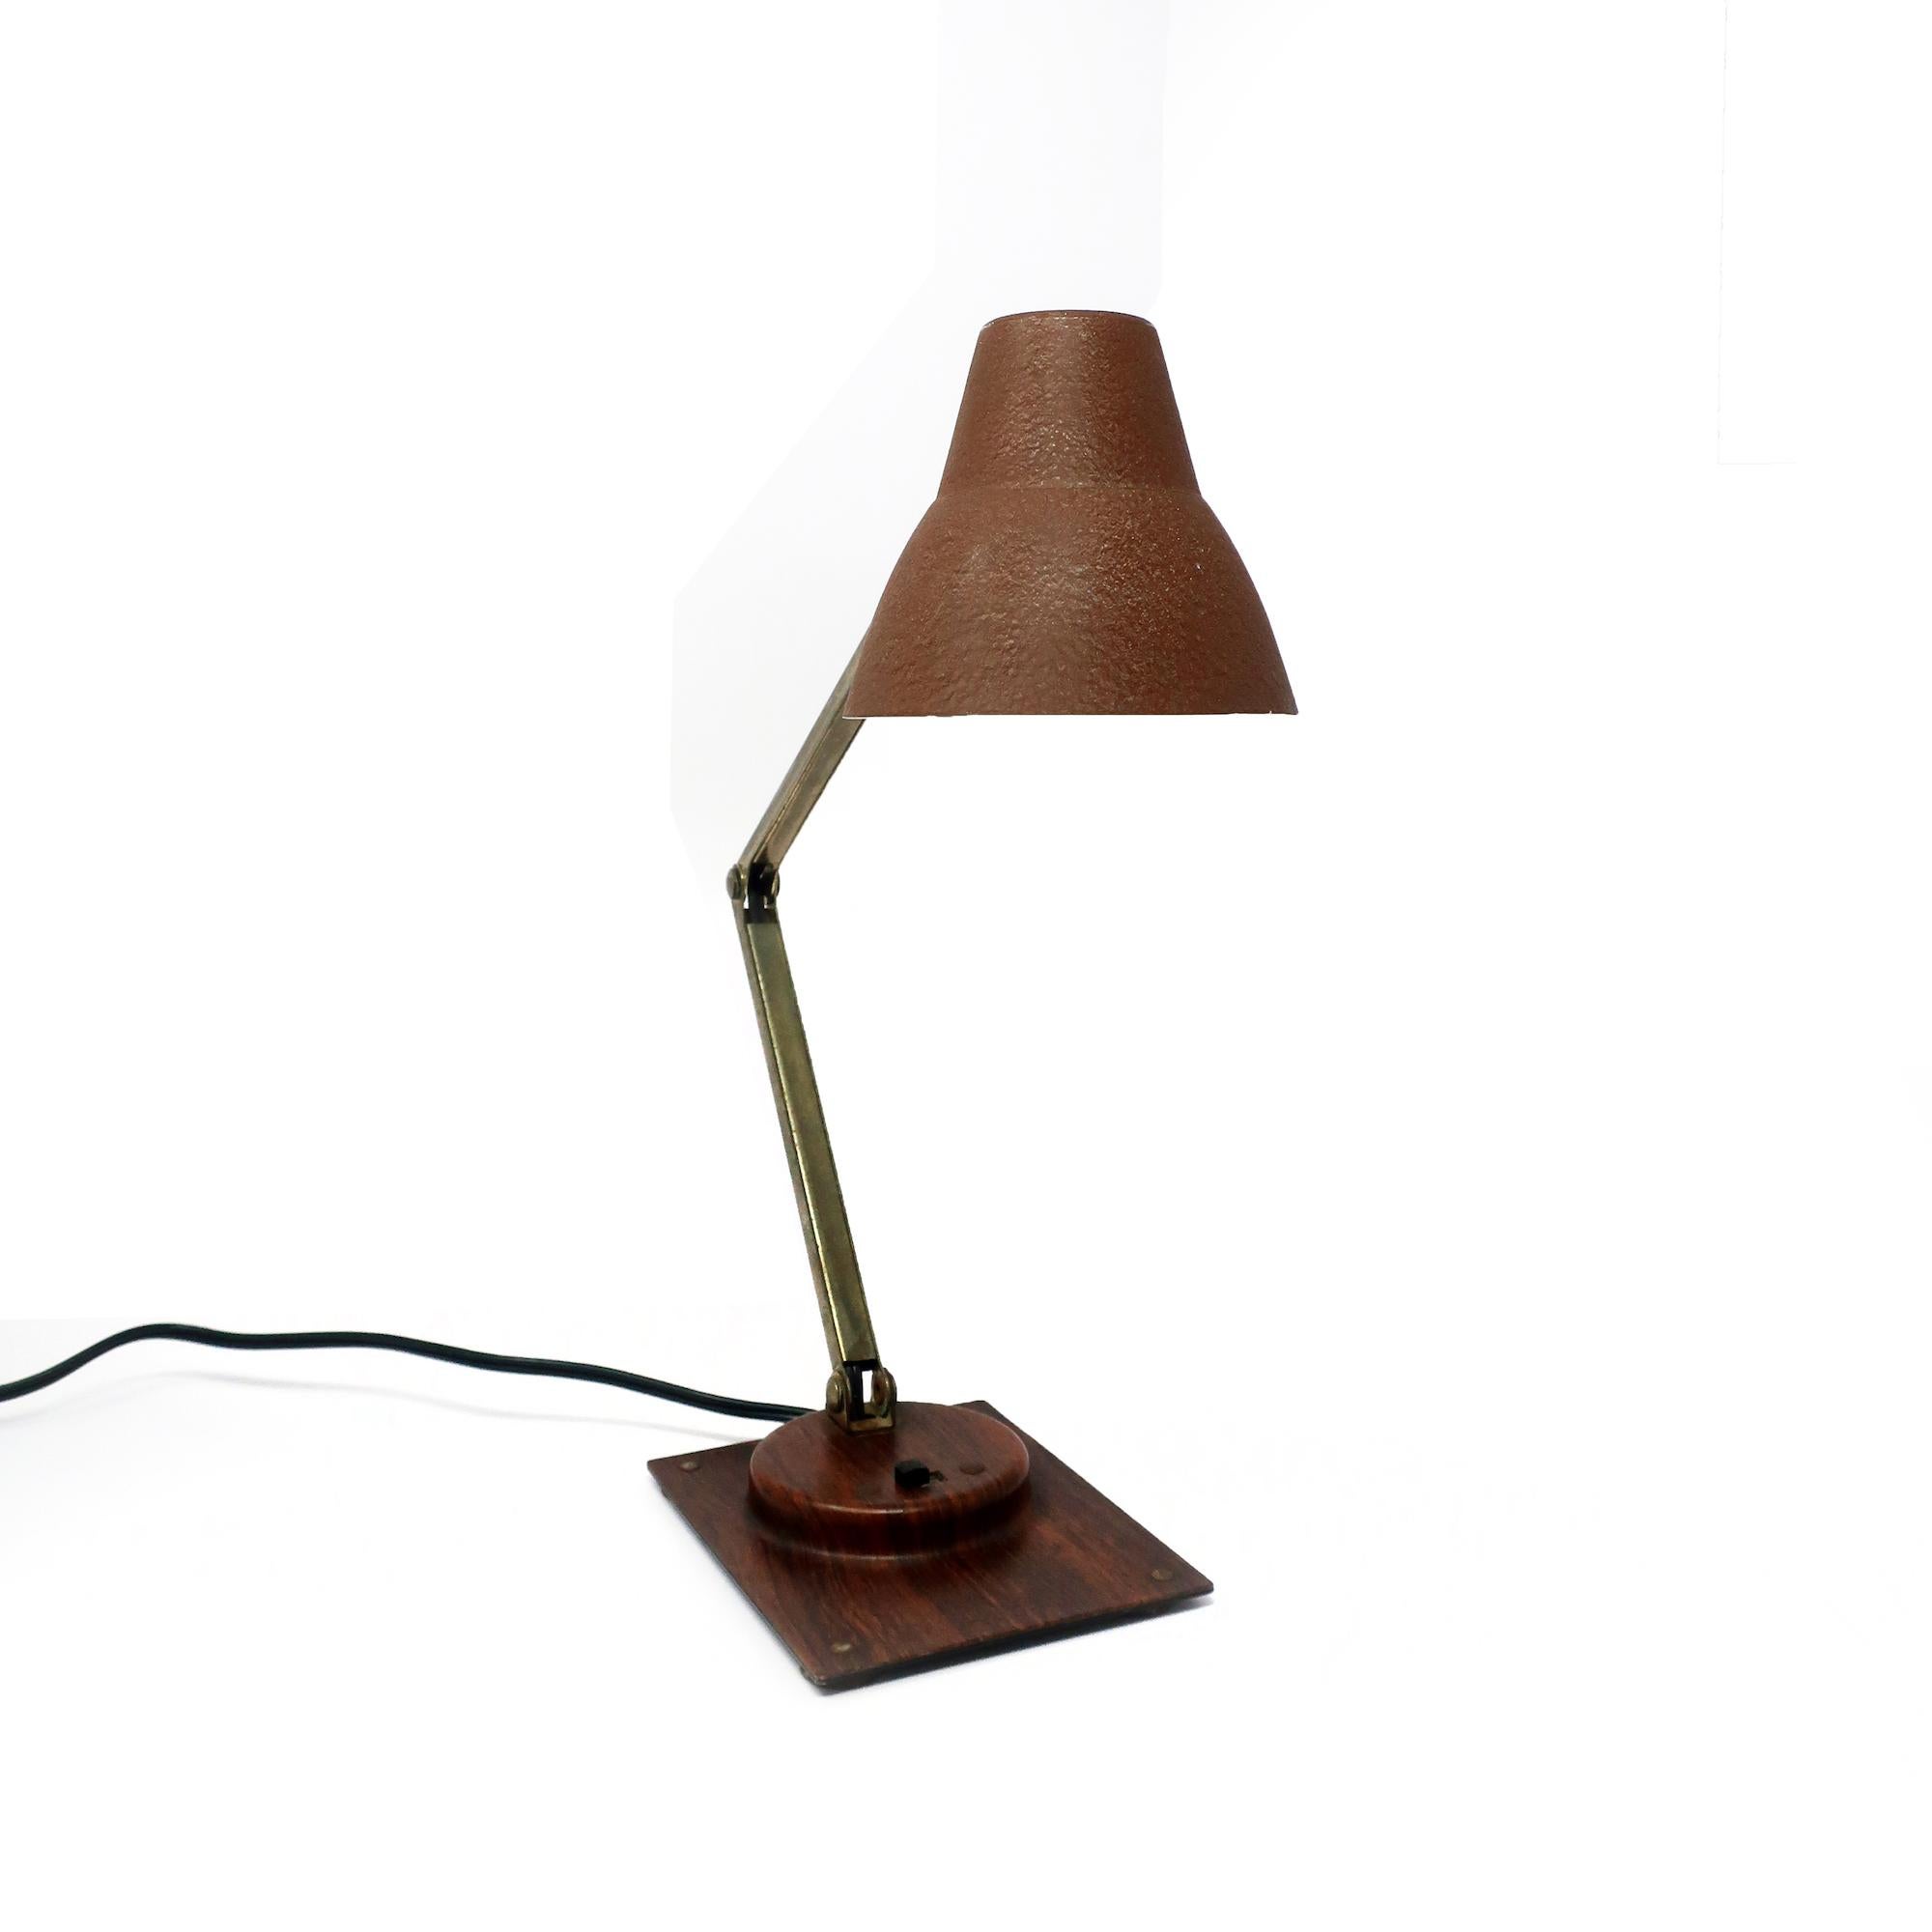 A perfect mid-century modern Tensor articulating desk lamp. Brown wood grain base and brown textured shade, chrome stem, and switch on the base. In very good vintage condition.

4” x 8.5” x 14”, extends to 20” tall